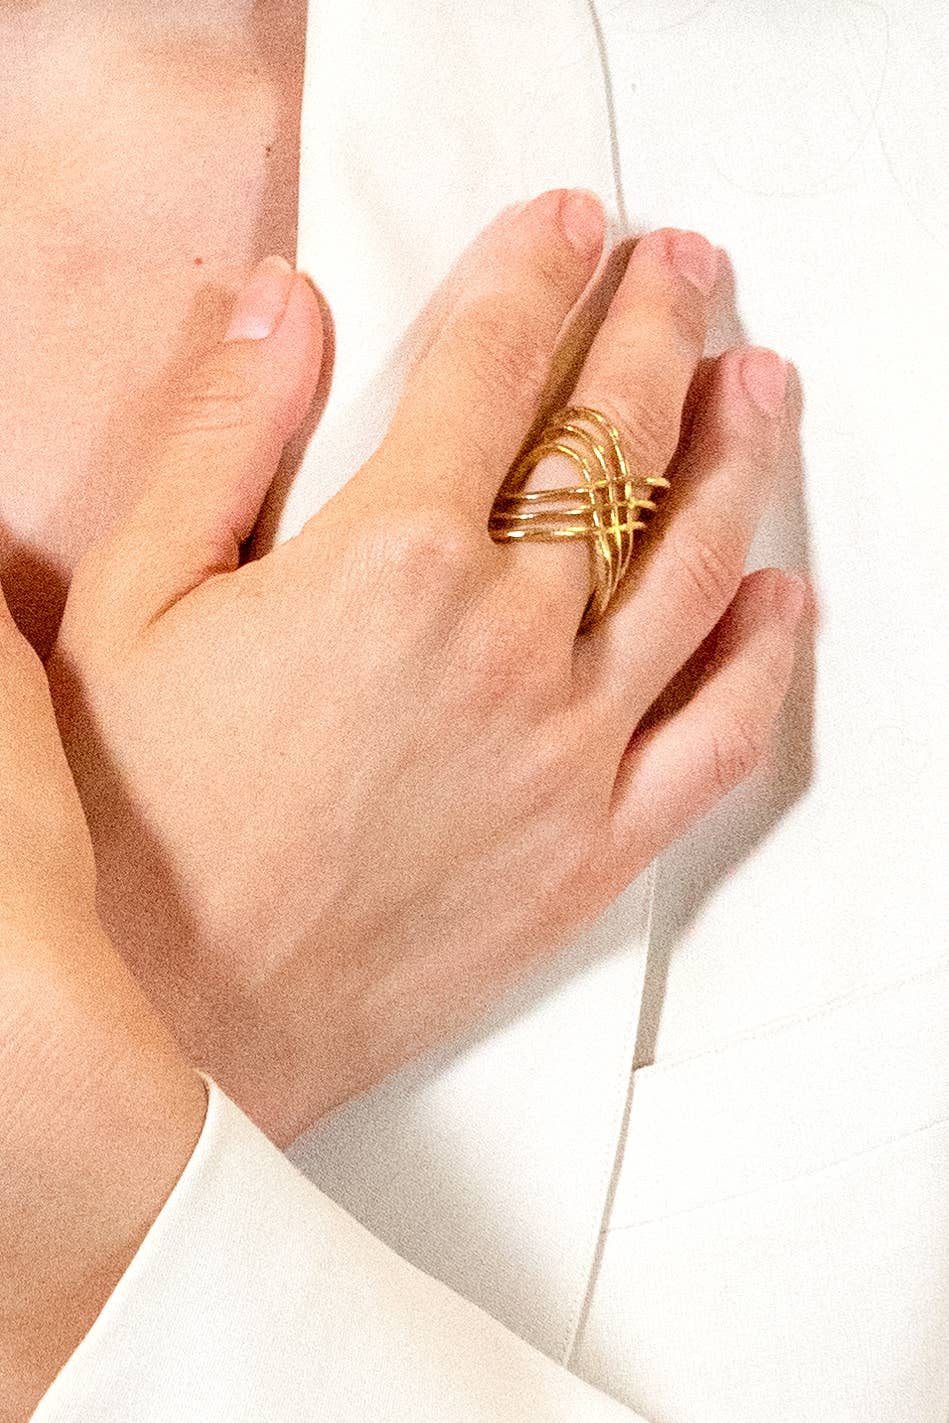 model is wearing a gold abstract ring